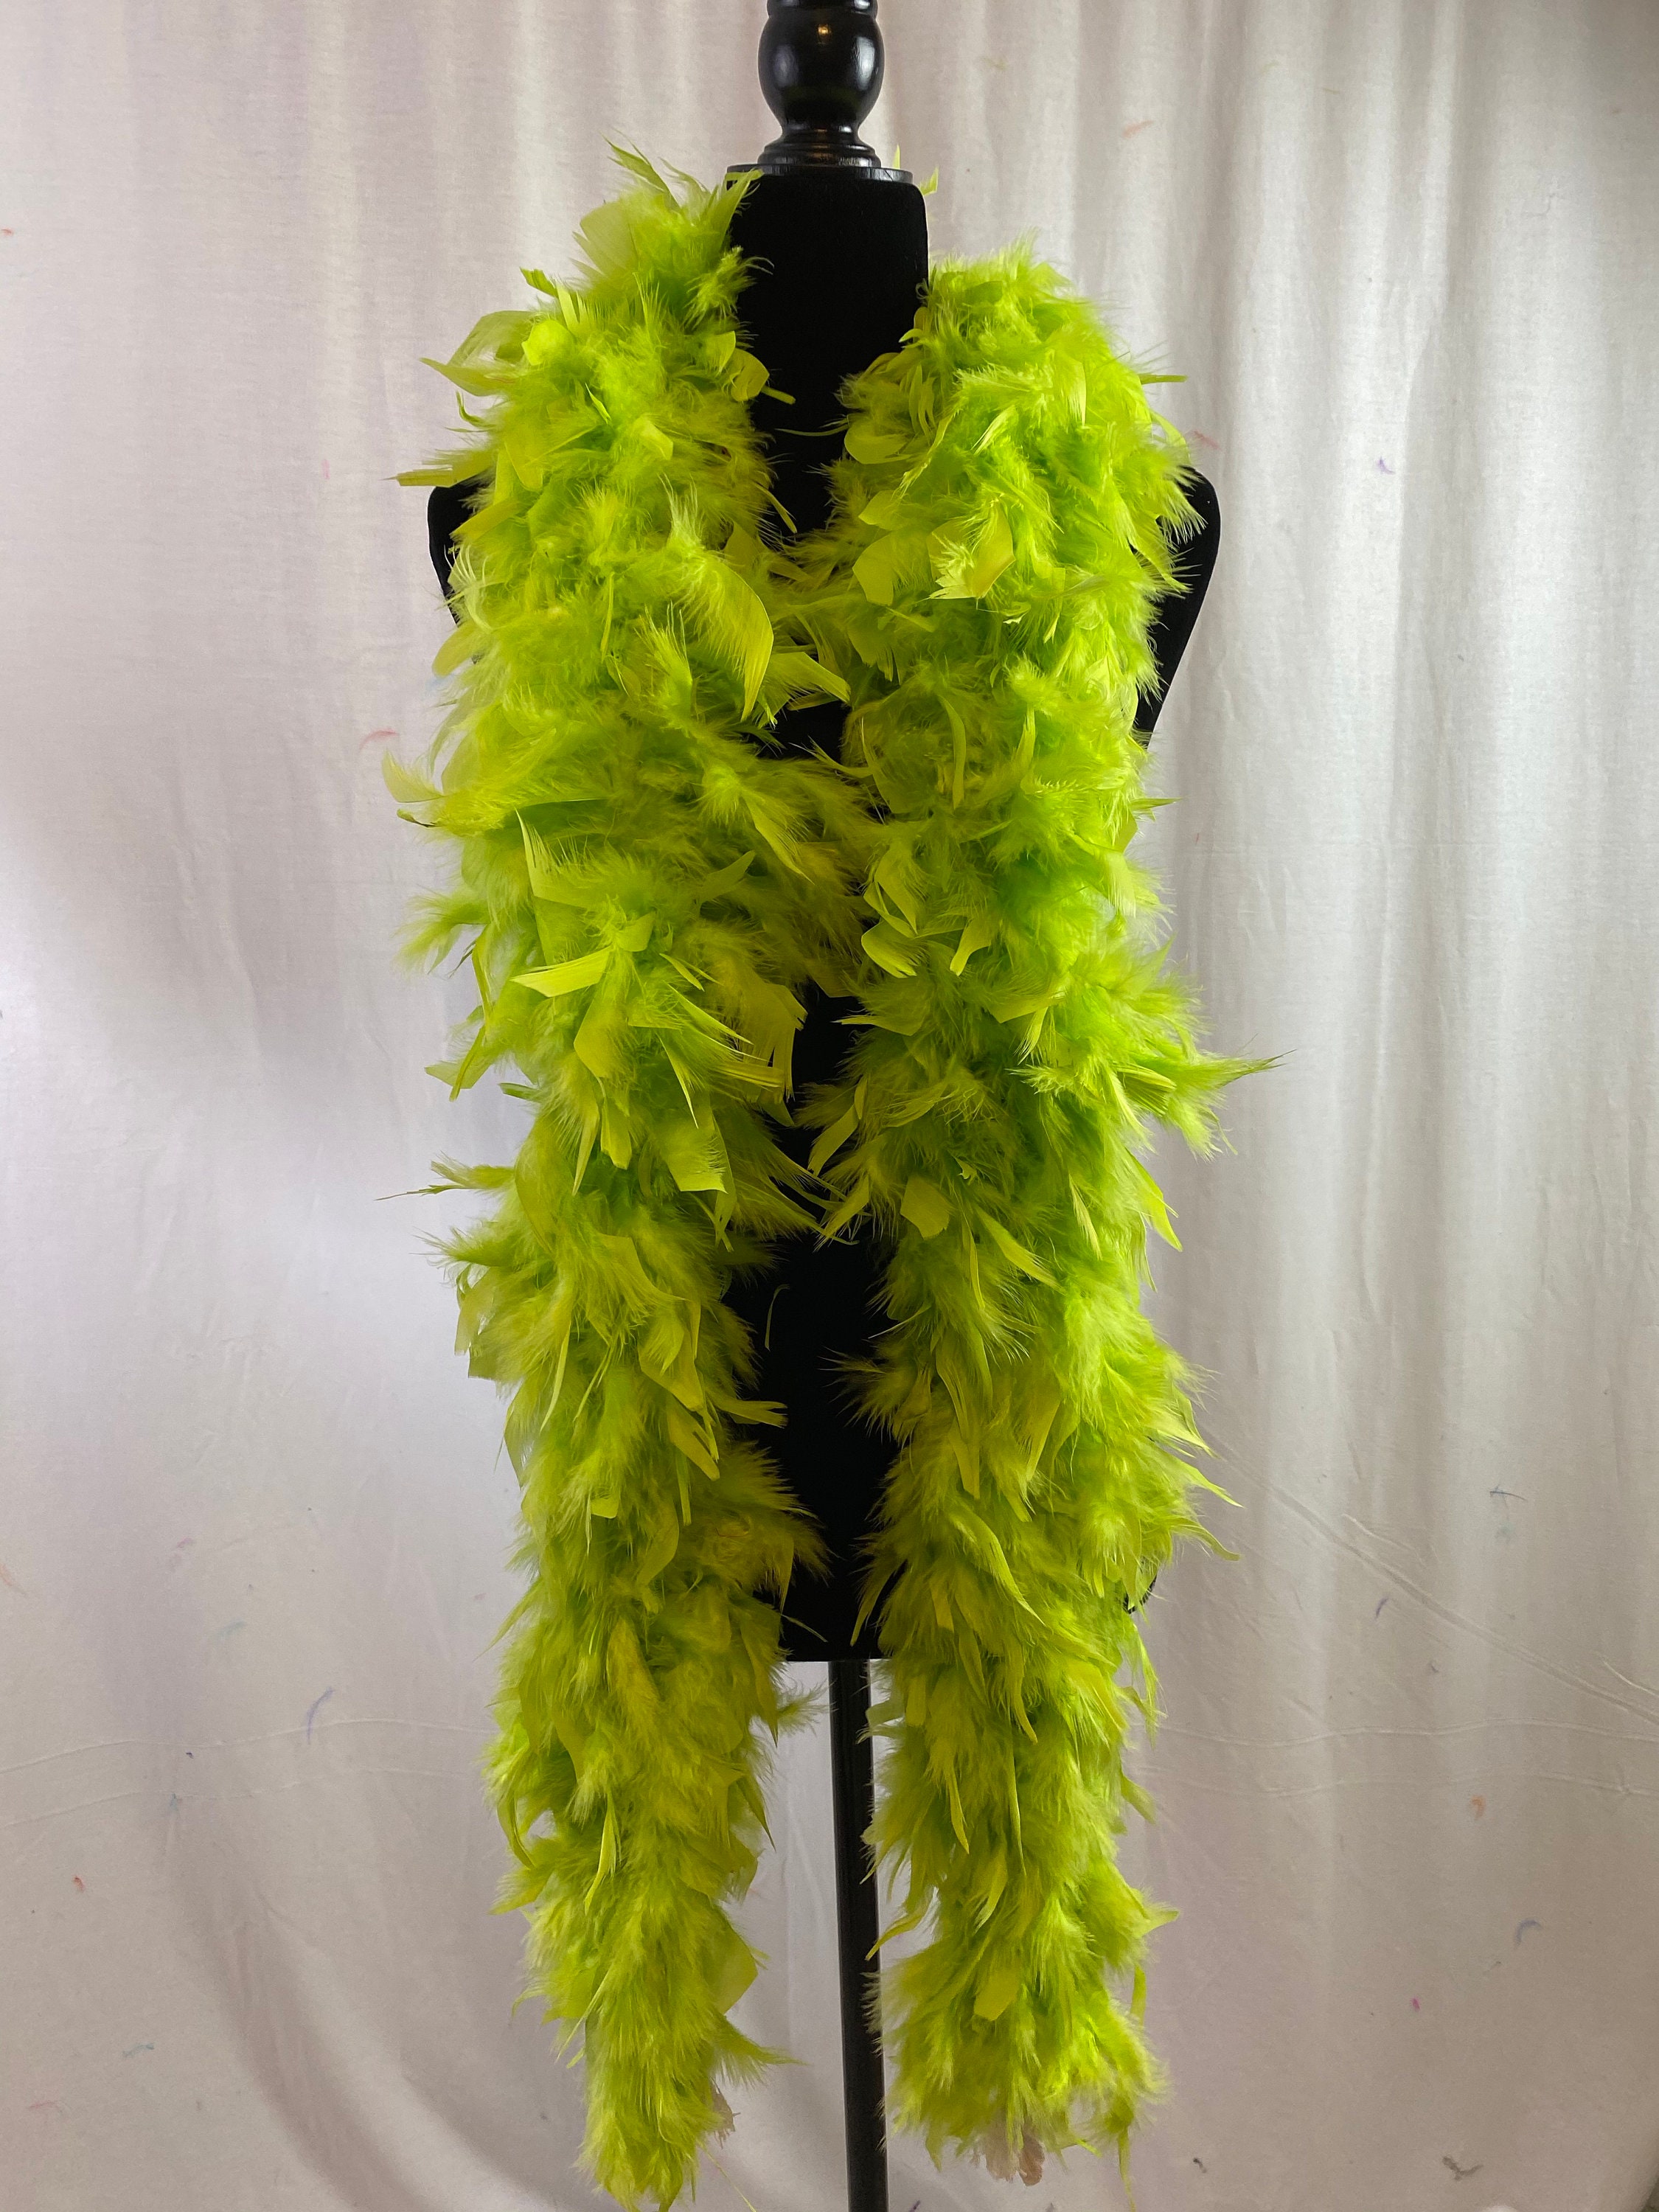 Lime Green Feathers for arts and crafts